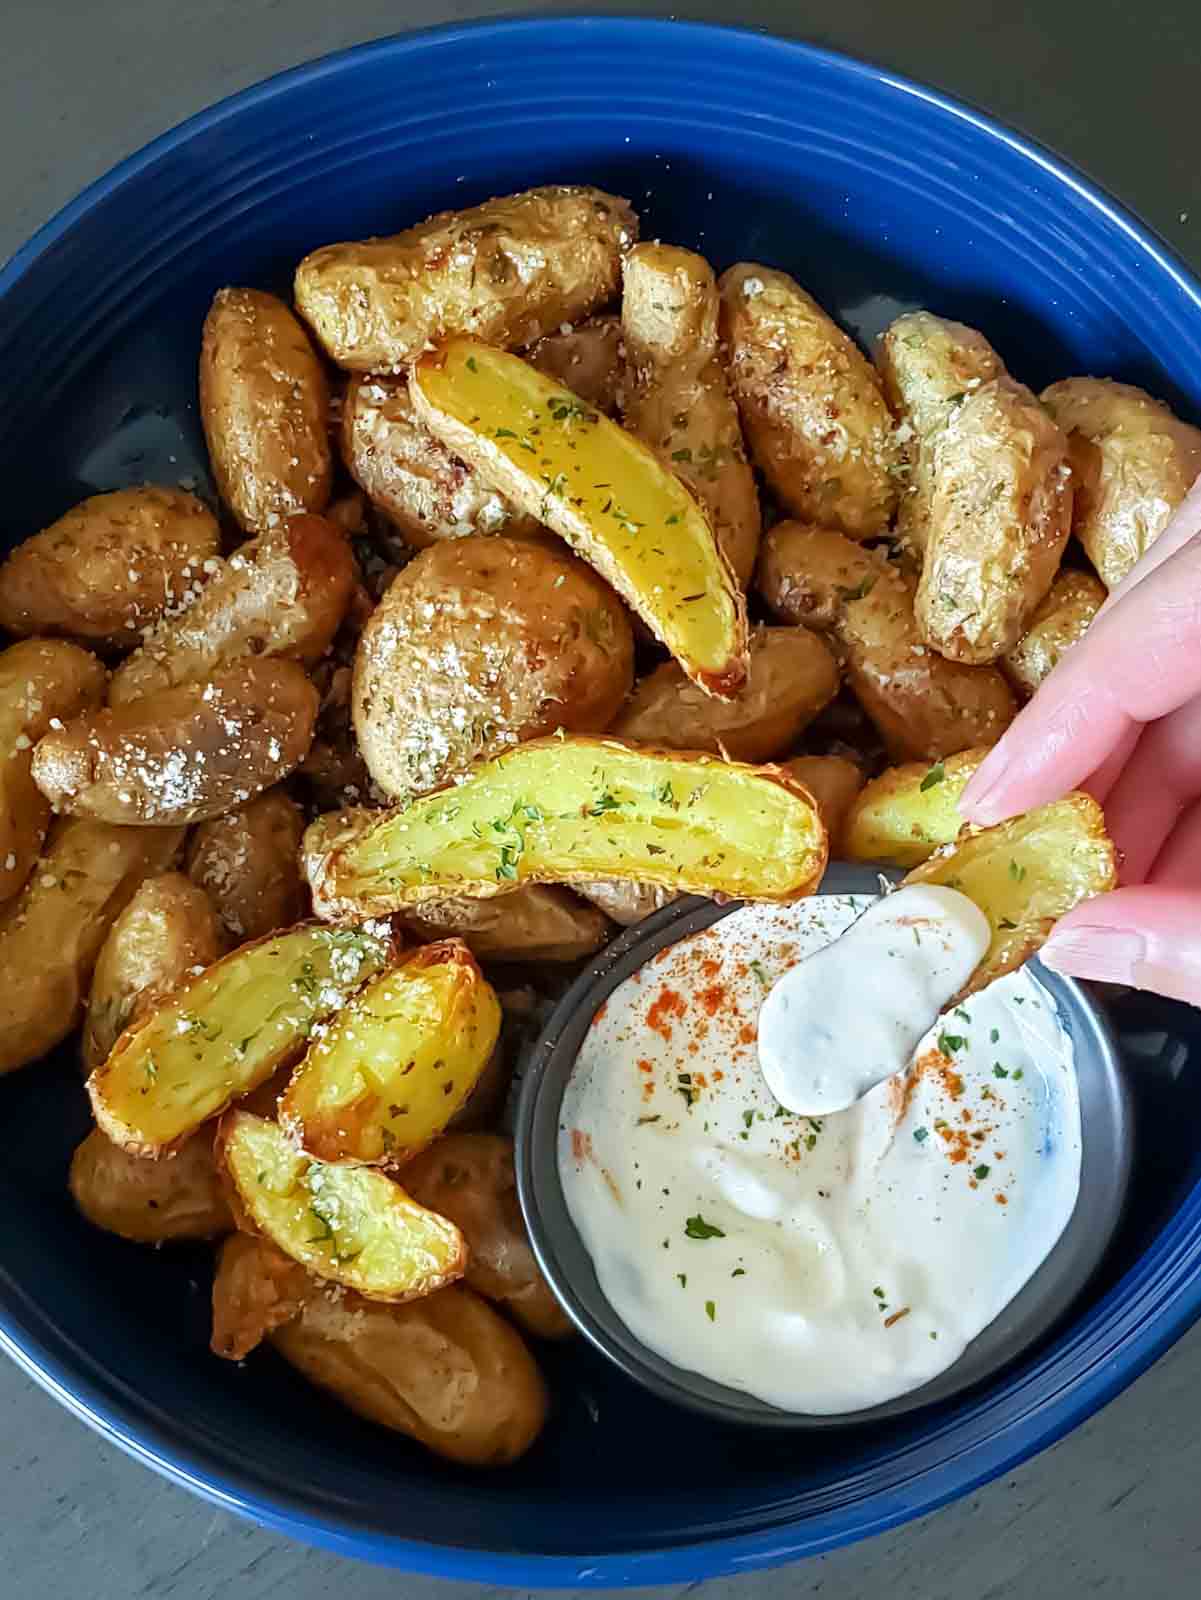 Crispy roasted air fryer fingerling potatoes served with ranch dip.